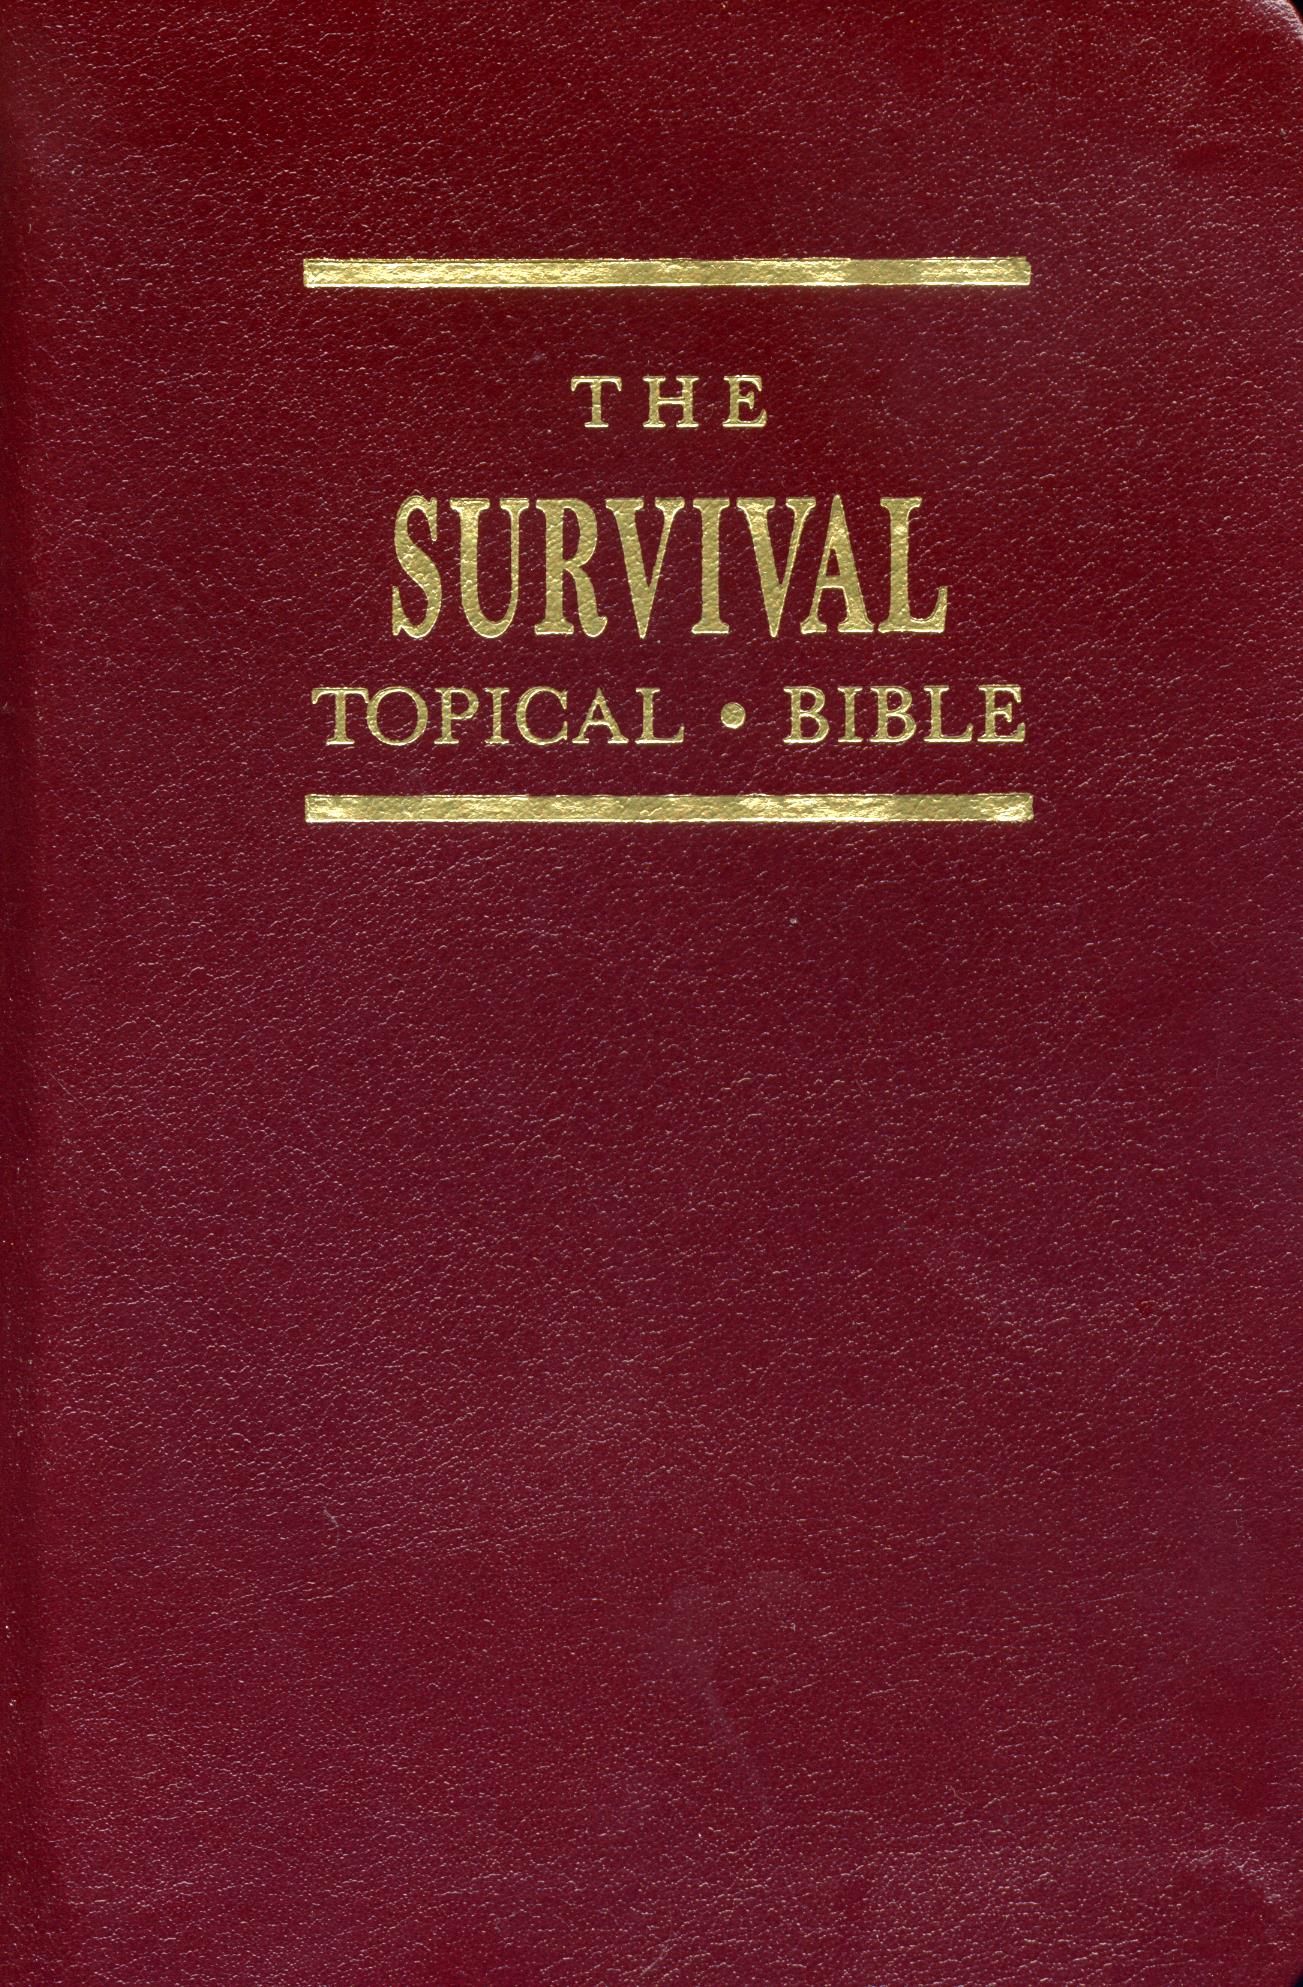 Harrison House: The Survival Topical Bible